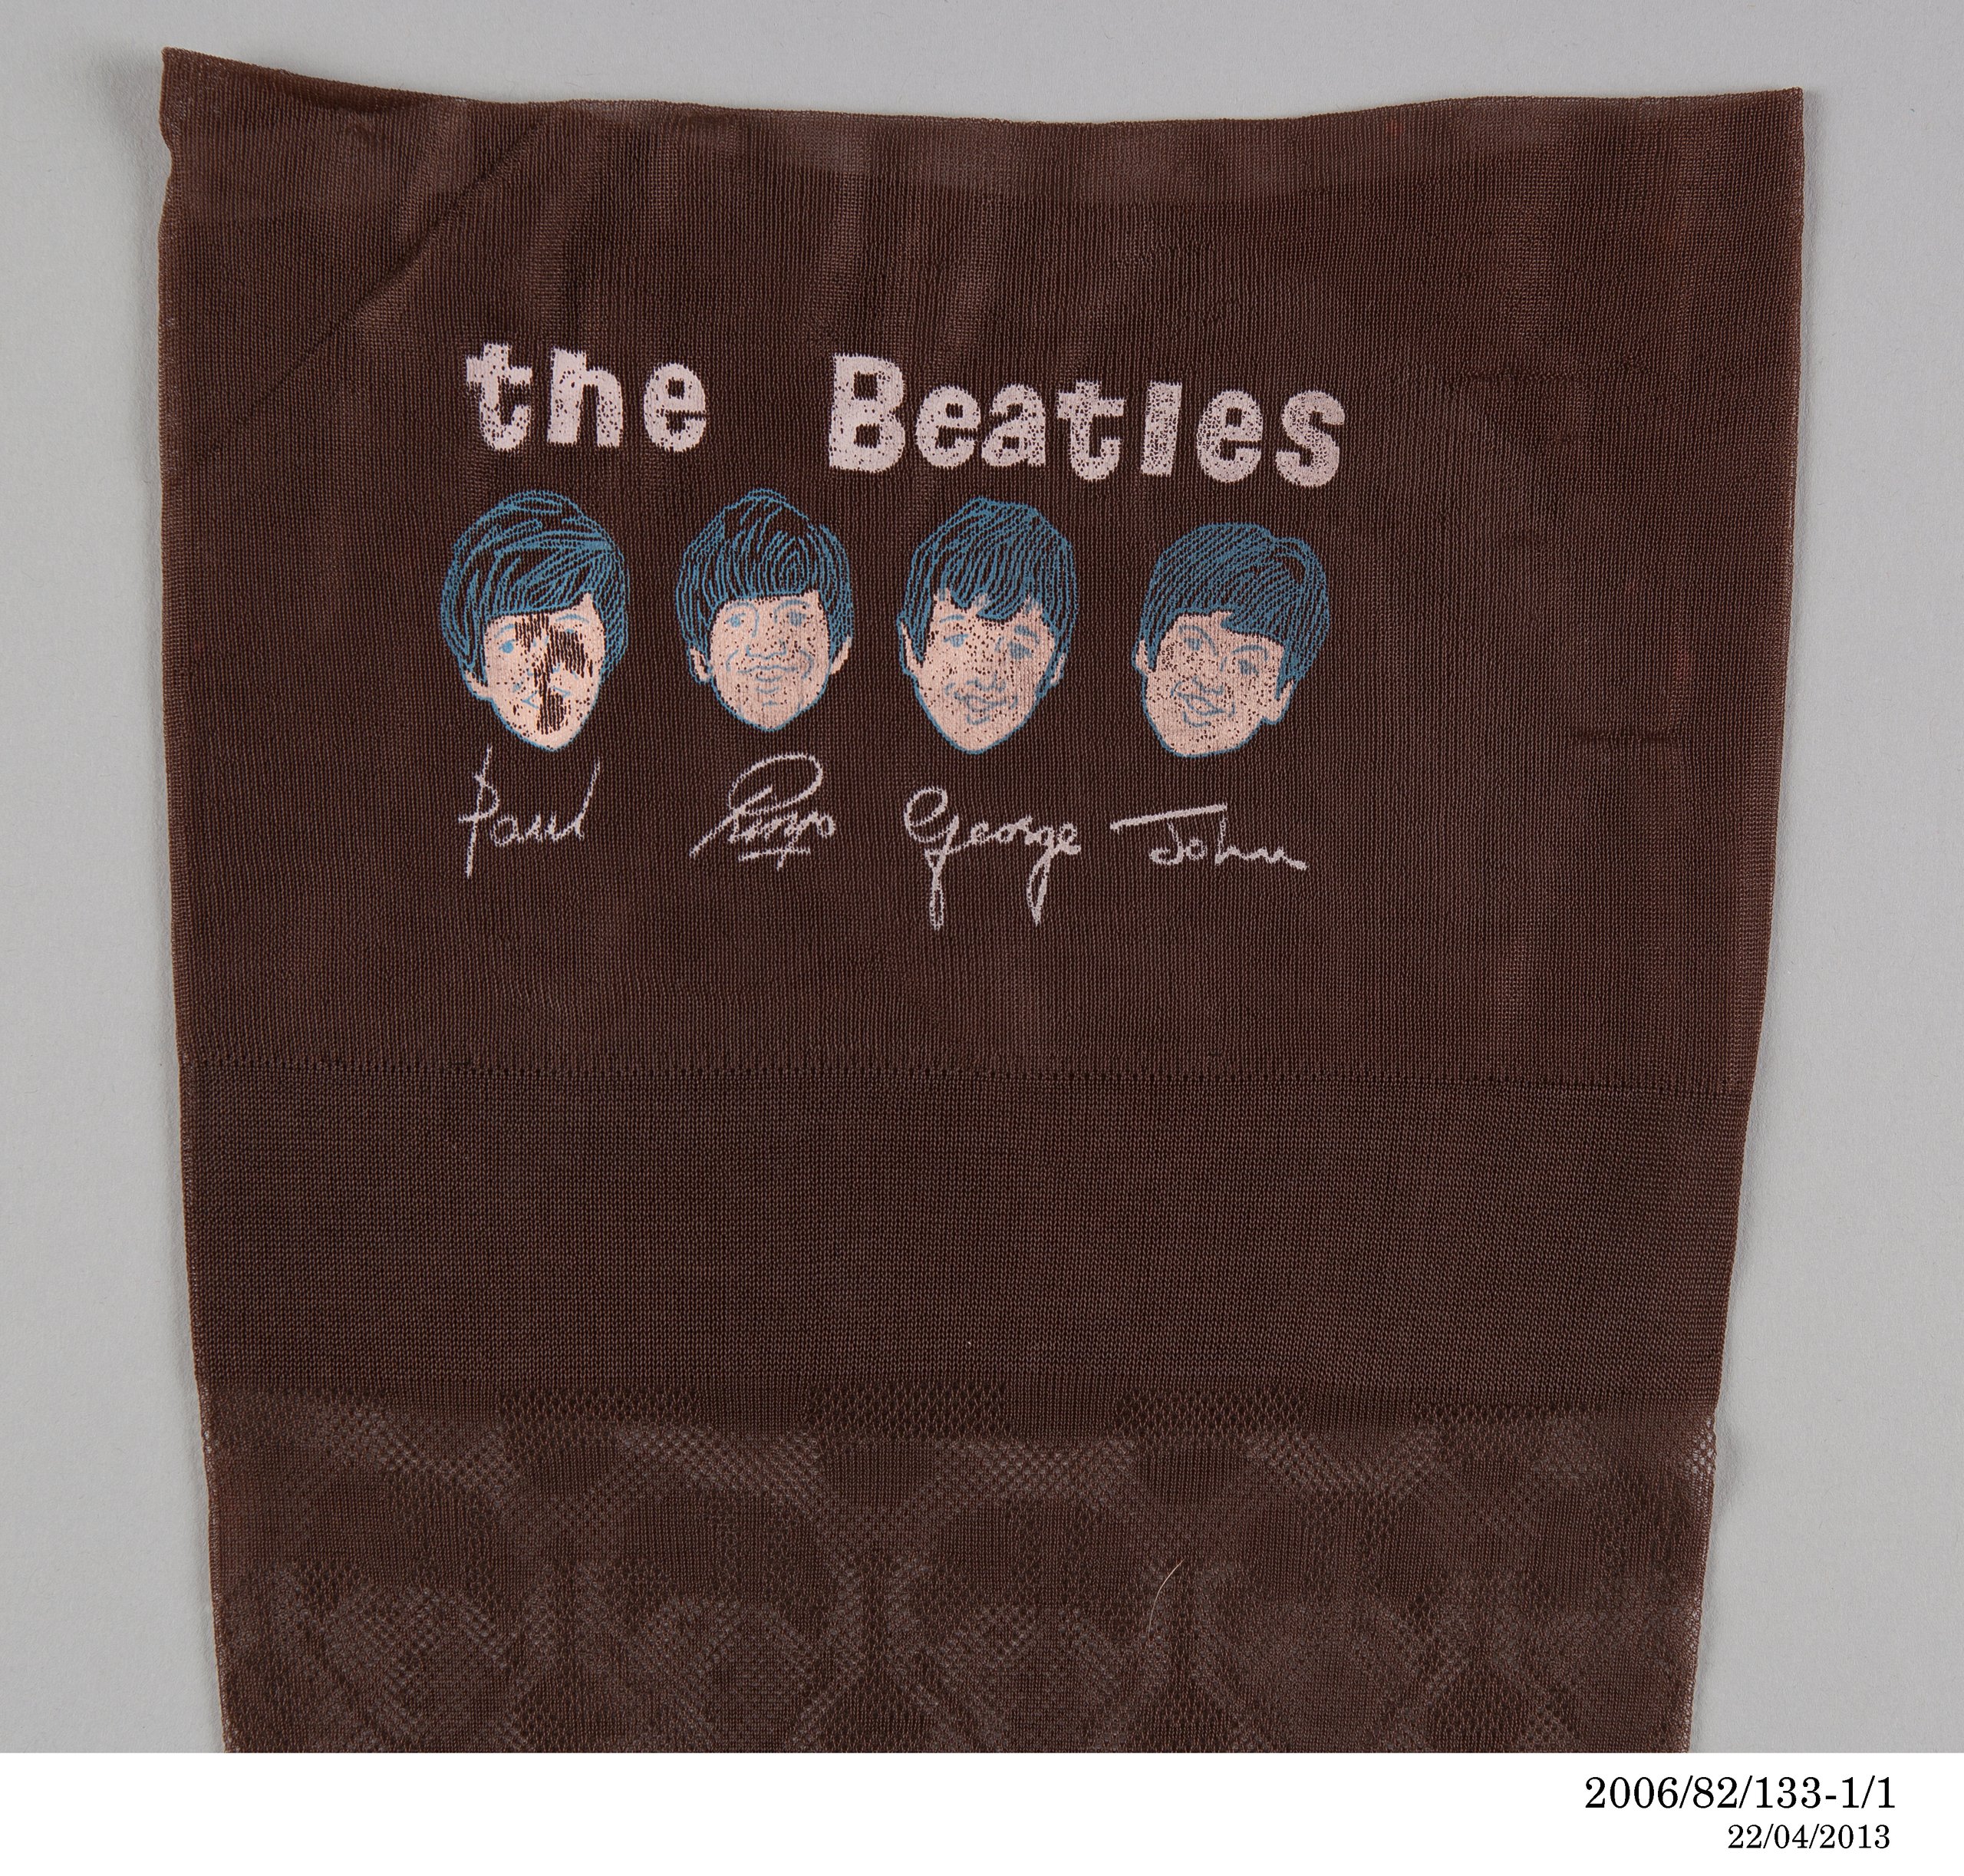 Pair of 'Beatles' stockings with packaging by Ballito